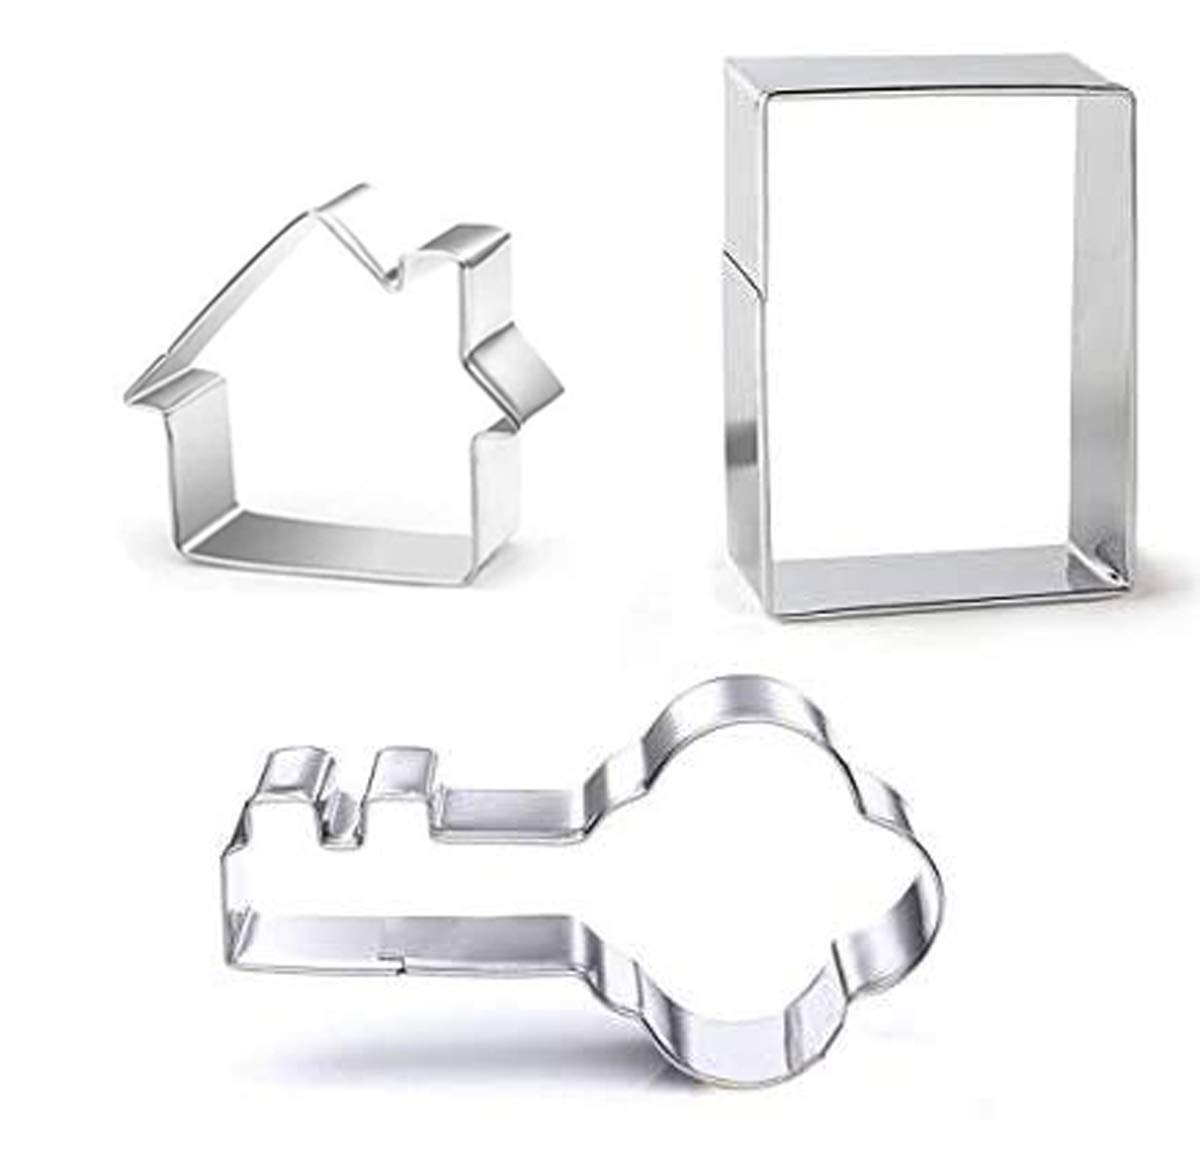 3 Pieces Cookie Cutter Set - Door Key Small House Stainless Steel